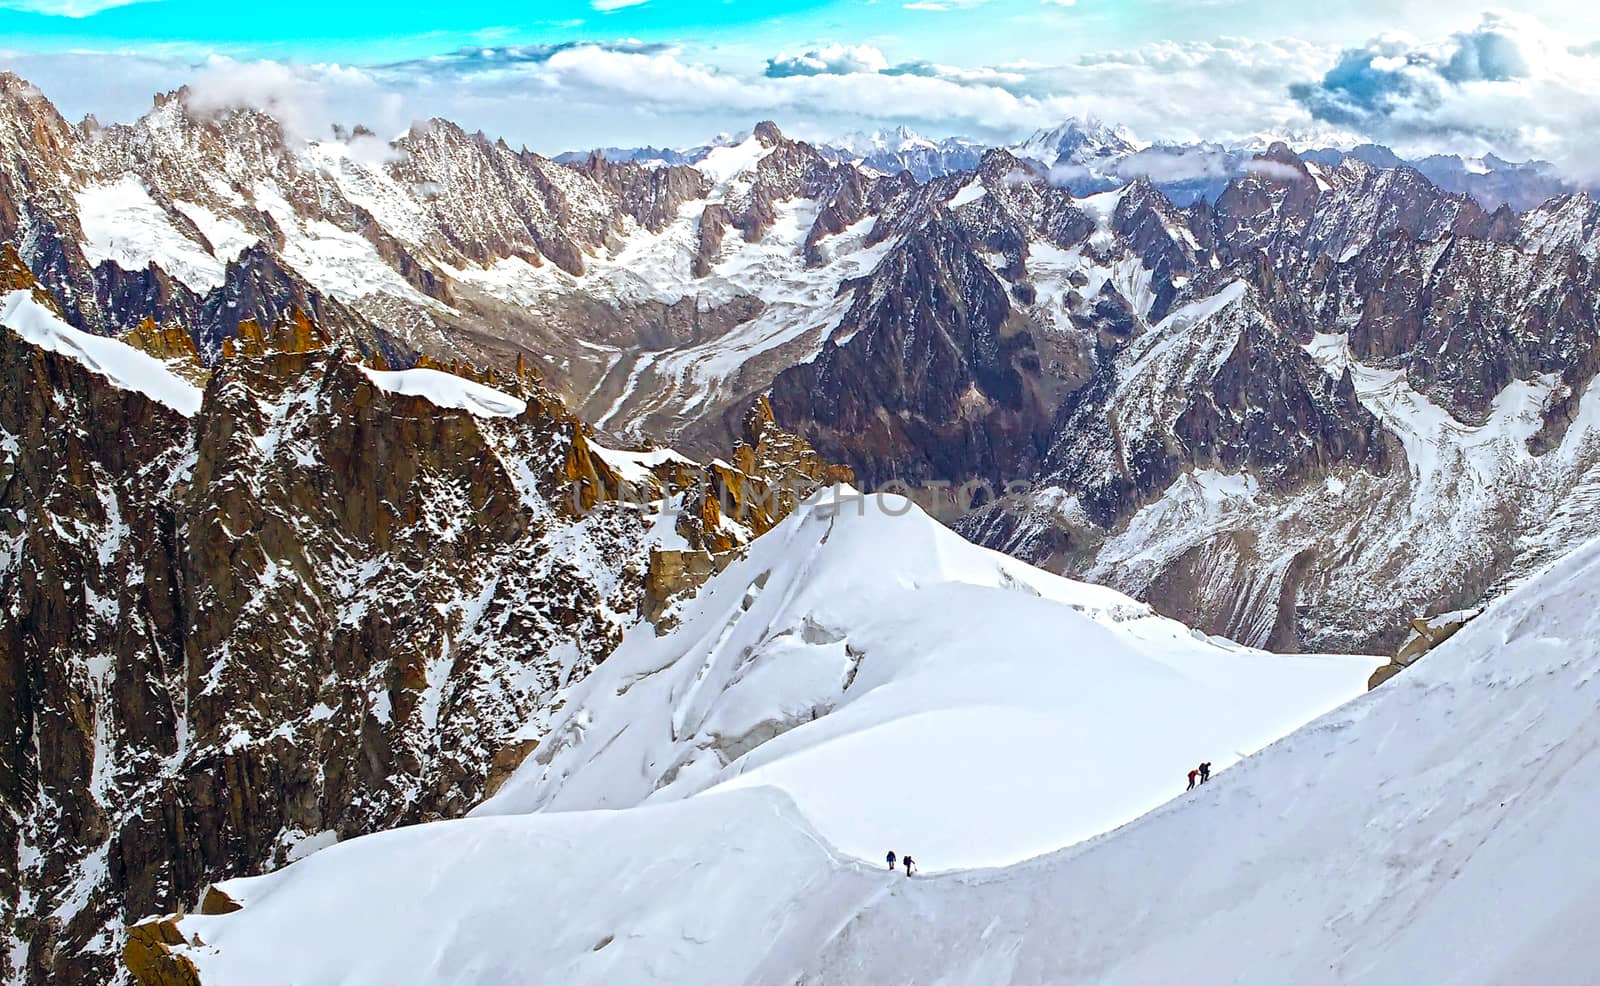 Two groups of alpinists mountaineers walking ascending snow glacier slope of la mer de glace. Mont Blanc massif mountains, Chamonix, France, Alps.